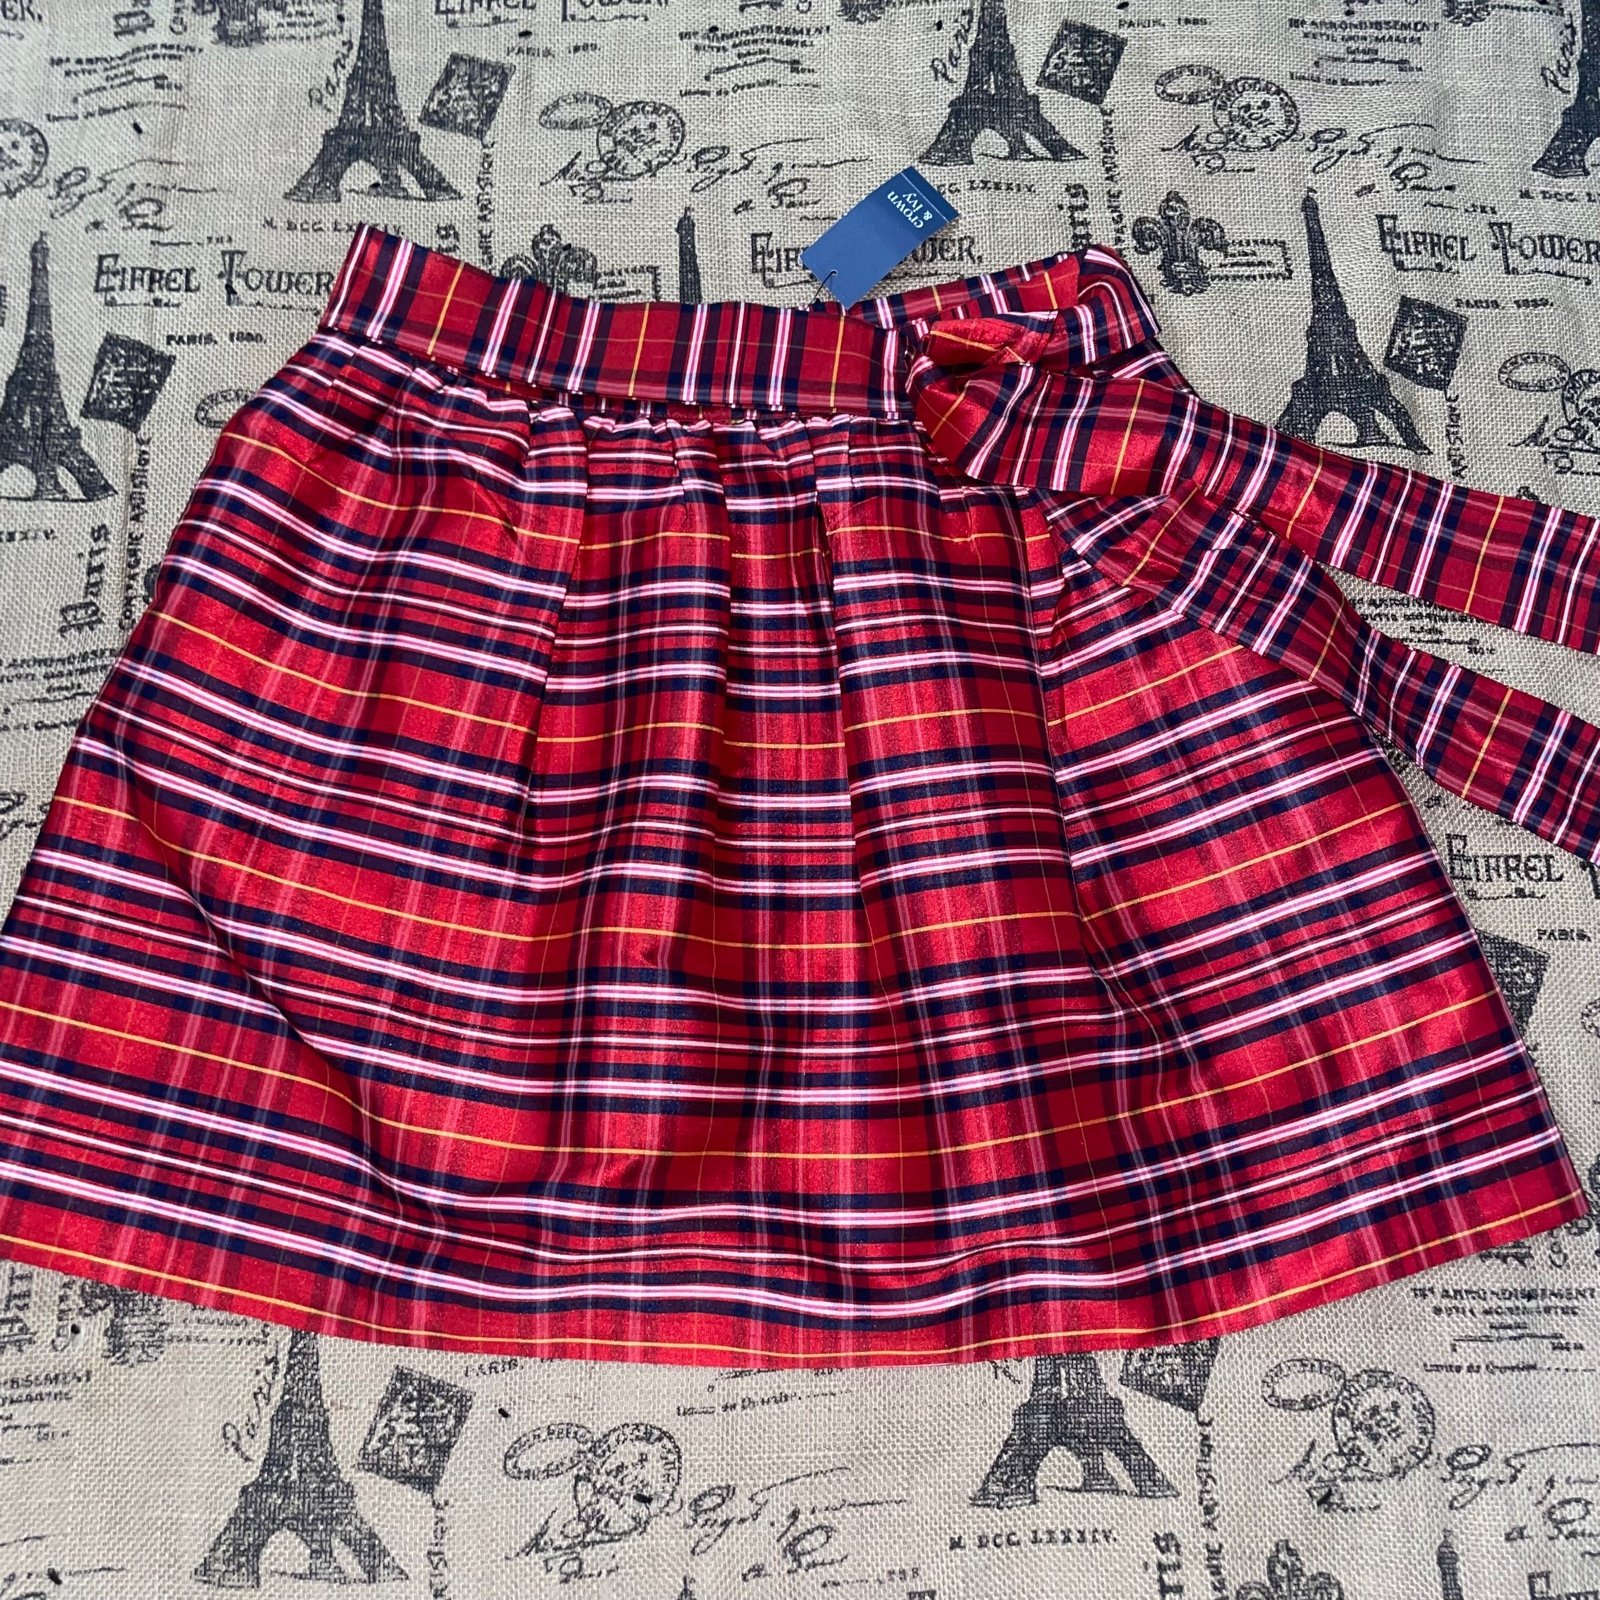 Perfect Crown & Ivy NWT! Plaid Red Party Flare Belted Skirt Size 8 oBW6WnZl9 Cheap